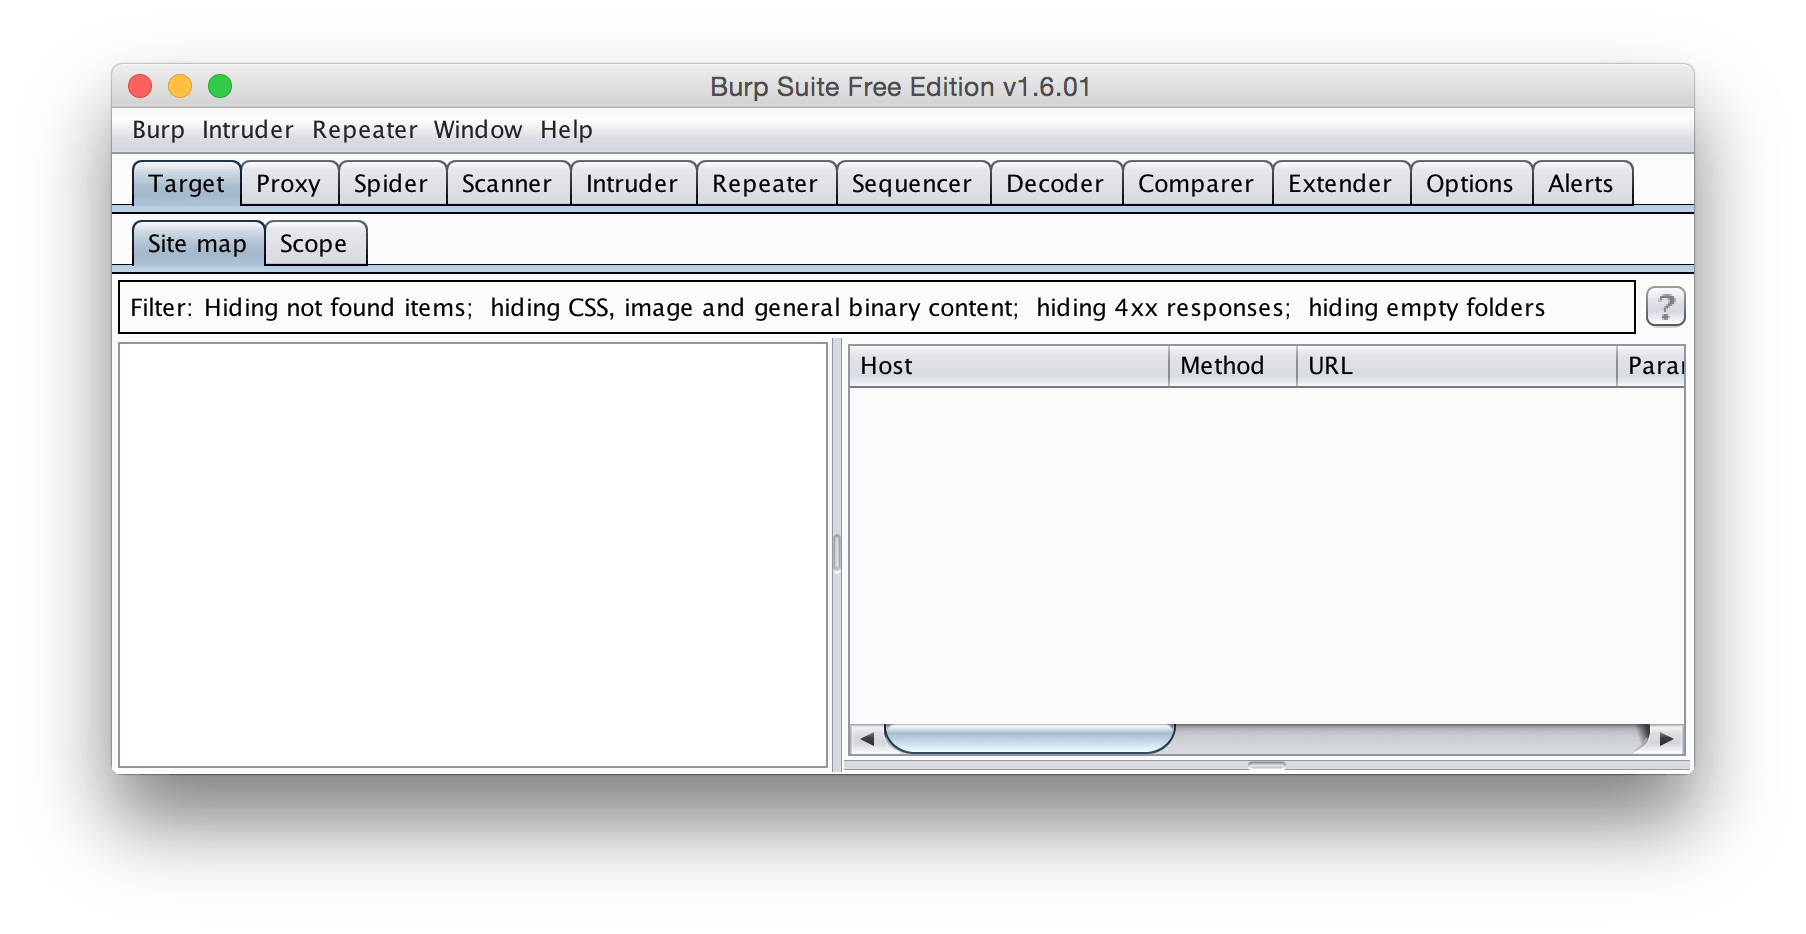 Burp Suite on First Open